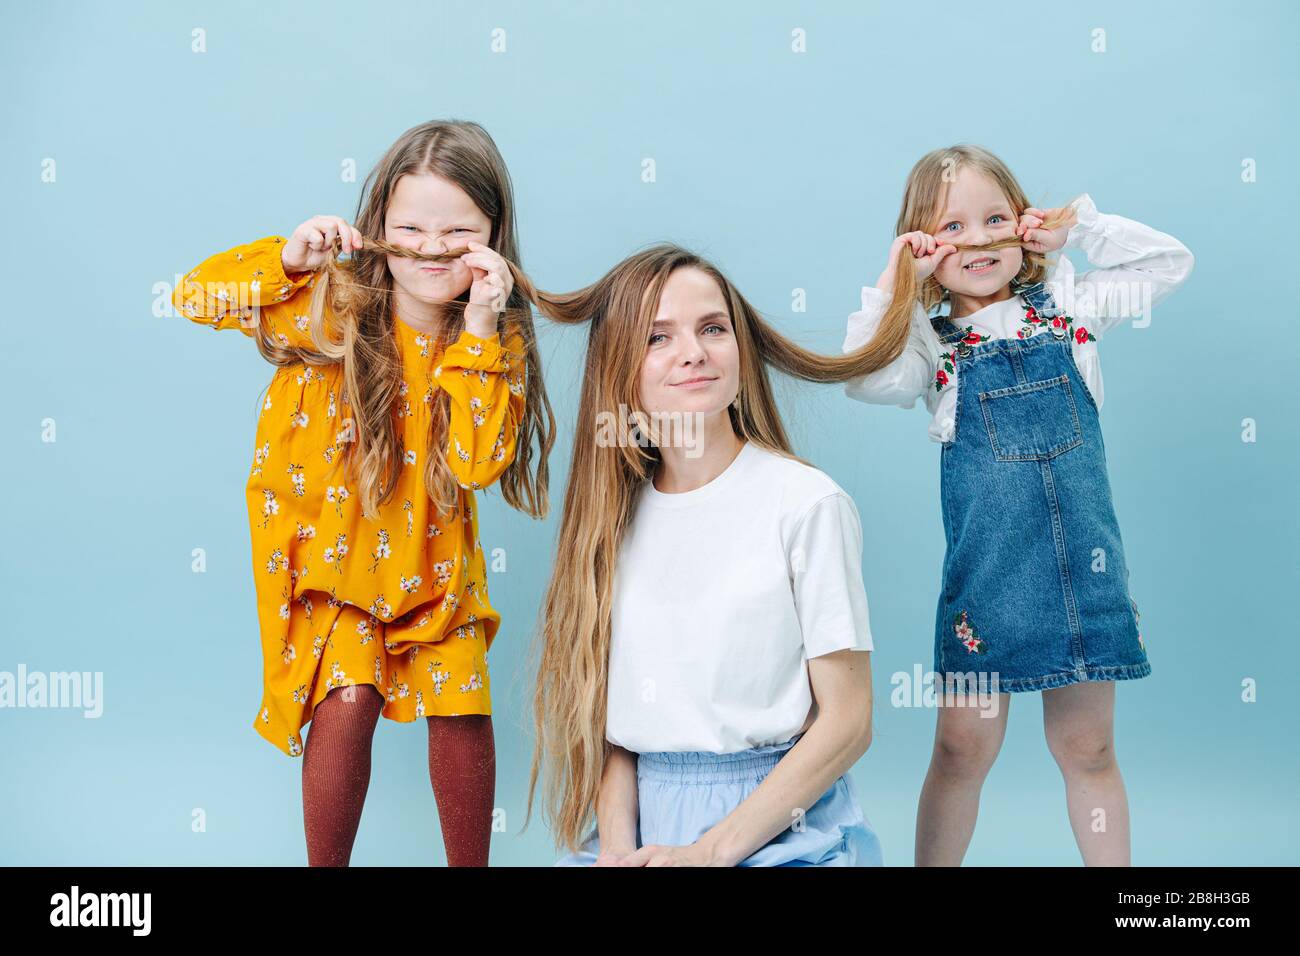 Daughters playing with their mother's hair making hair mustache over blue Stock Photo